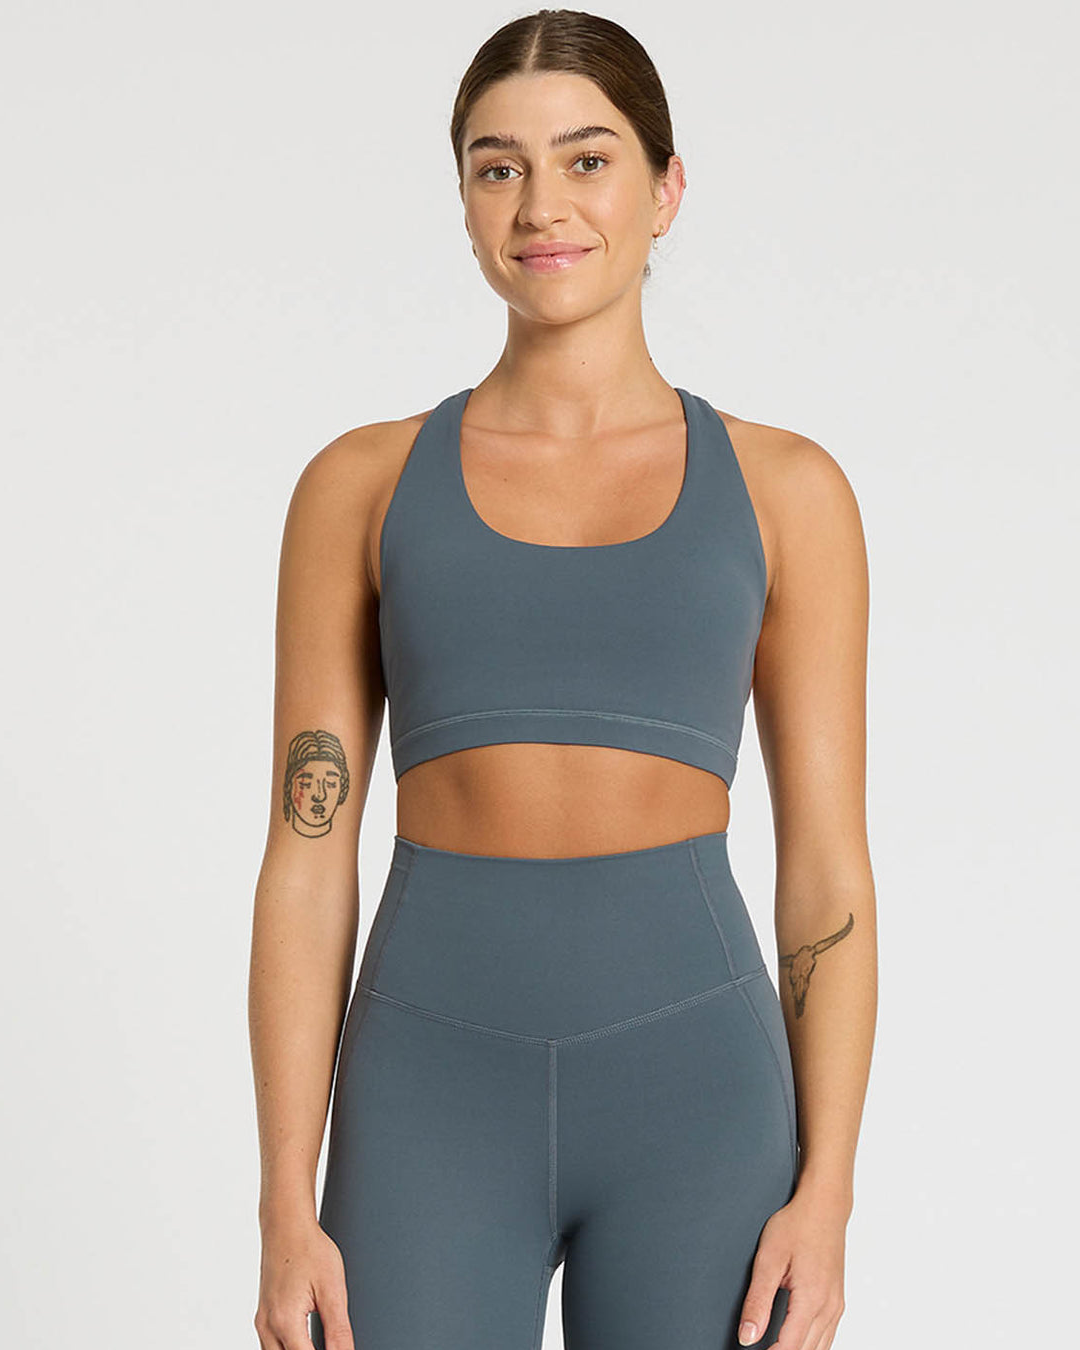 In Motion Racer Bra - Charcoal Activewear by Nimble - Prae Wellness